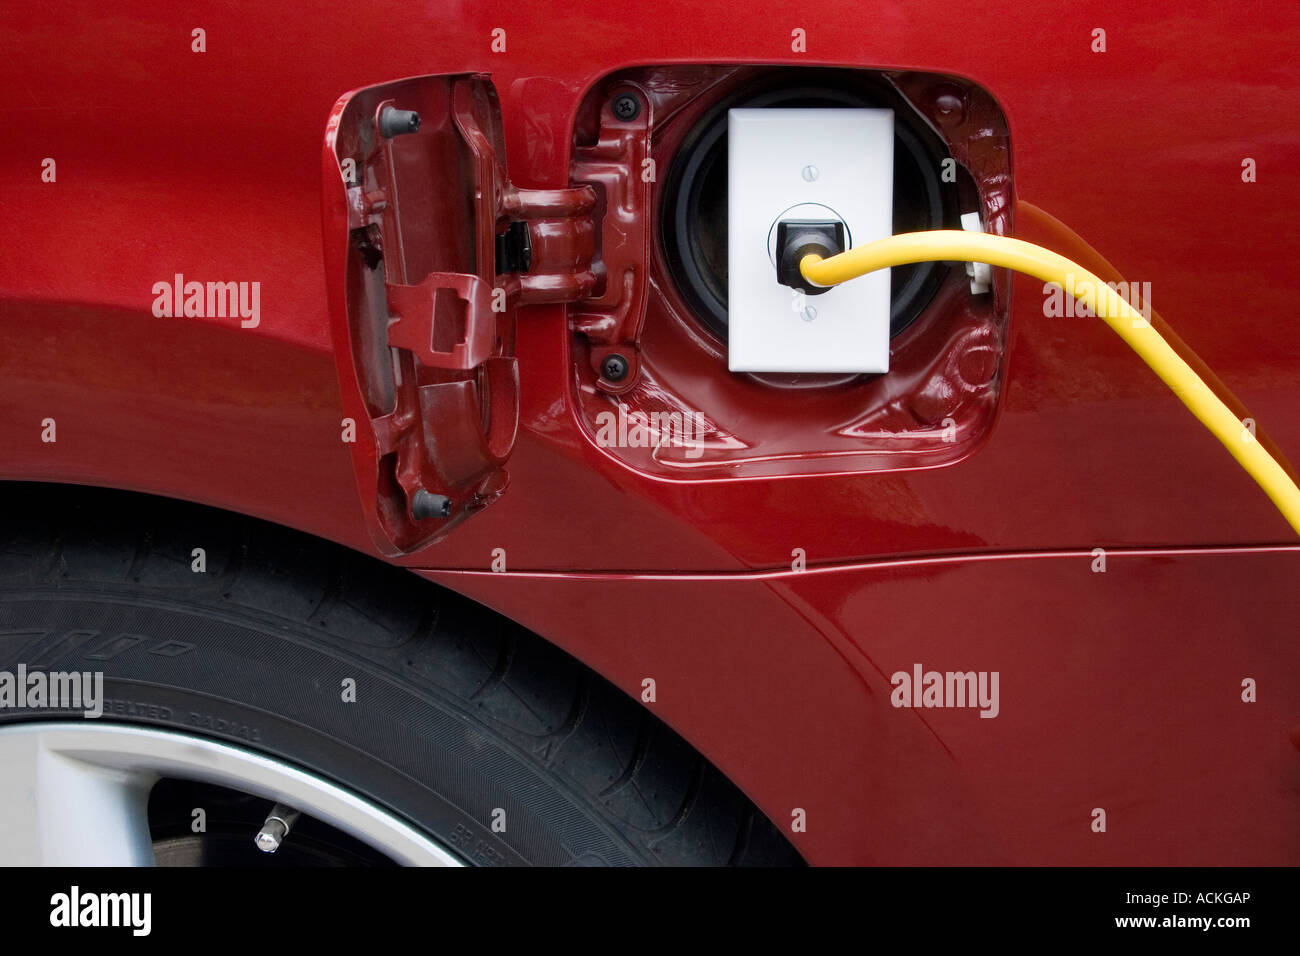 An electrical cord plugged into an outlet inside the gas tank door of a car Stock Photo